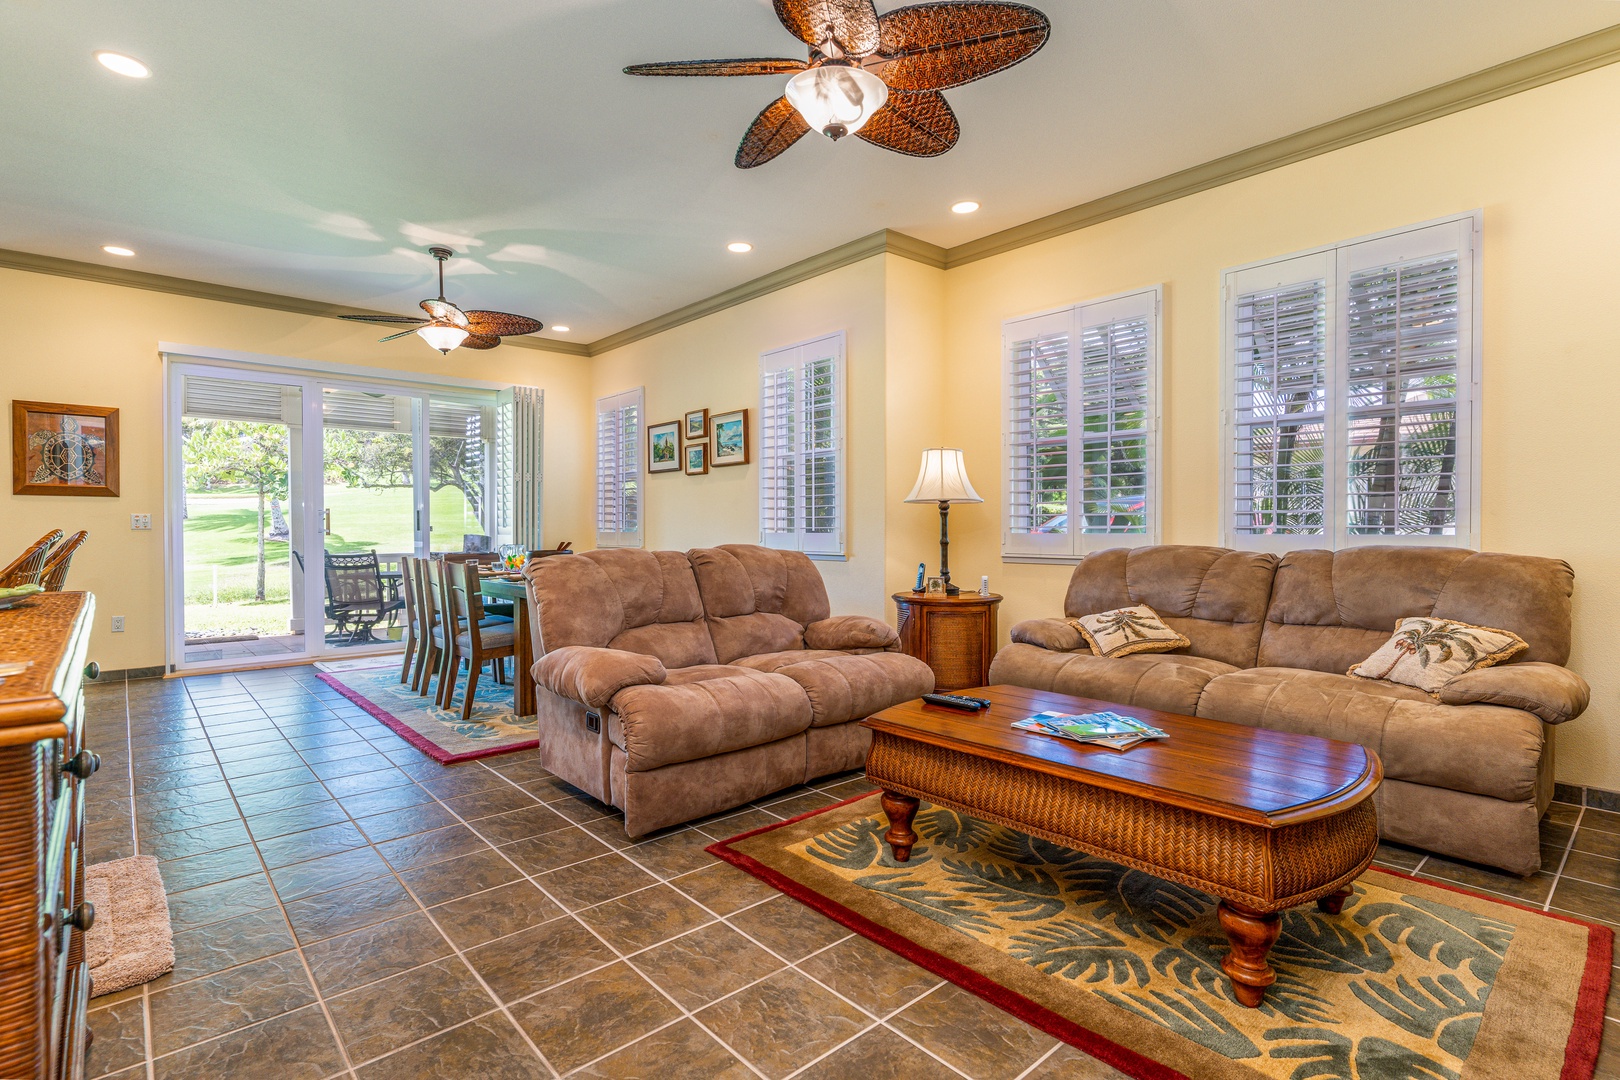 Kapolei Vacation Rentals, Coconut Plantation 1100-2 - Sink in to the plush seating with your favorite book in the living room area.